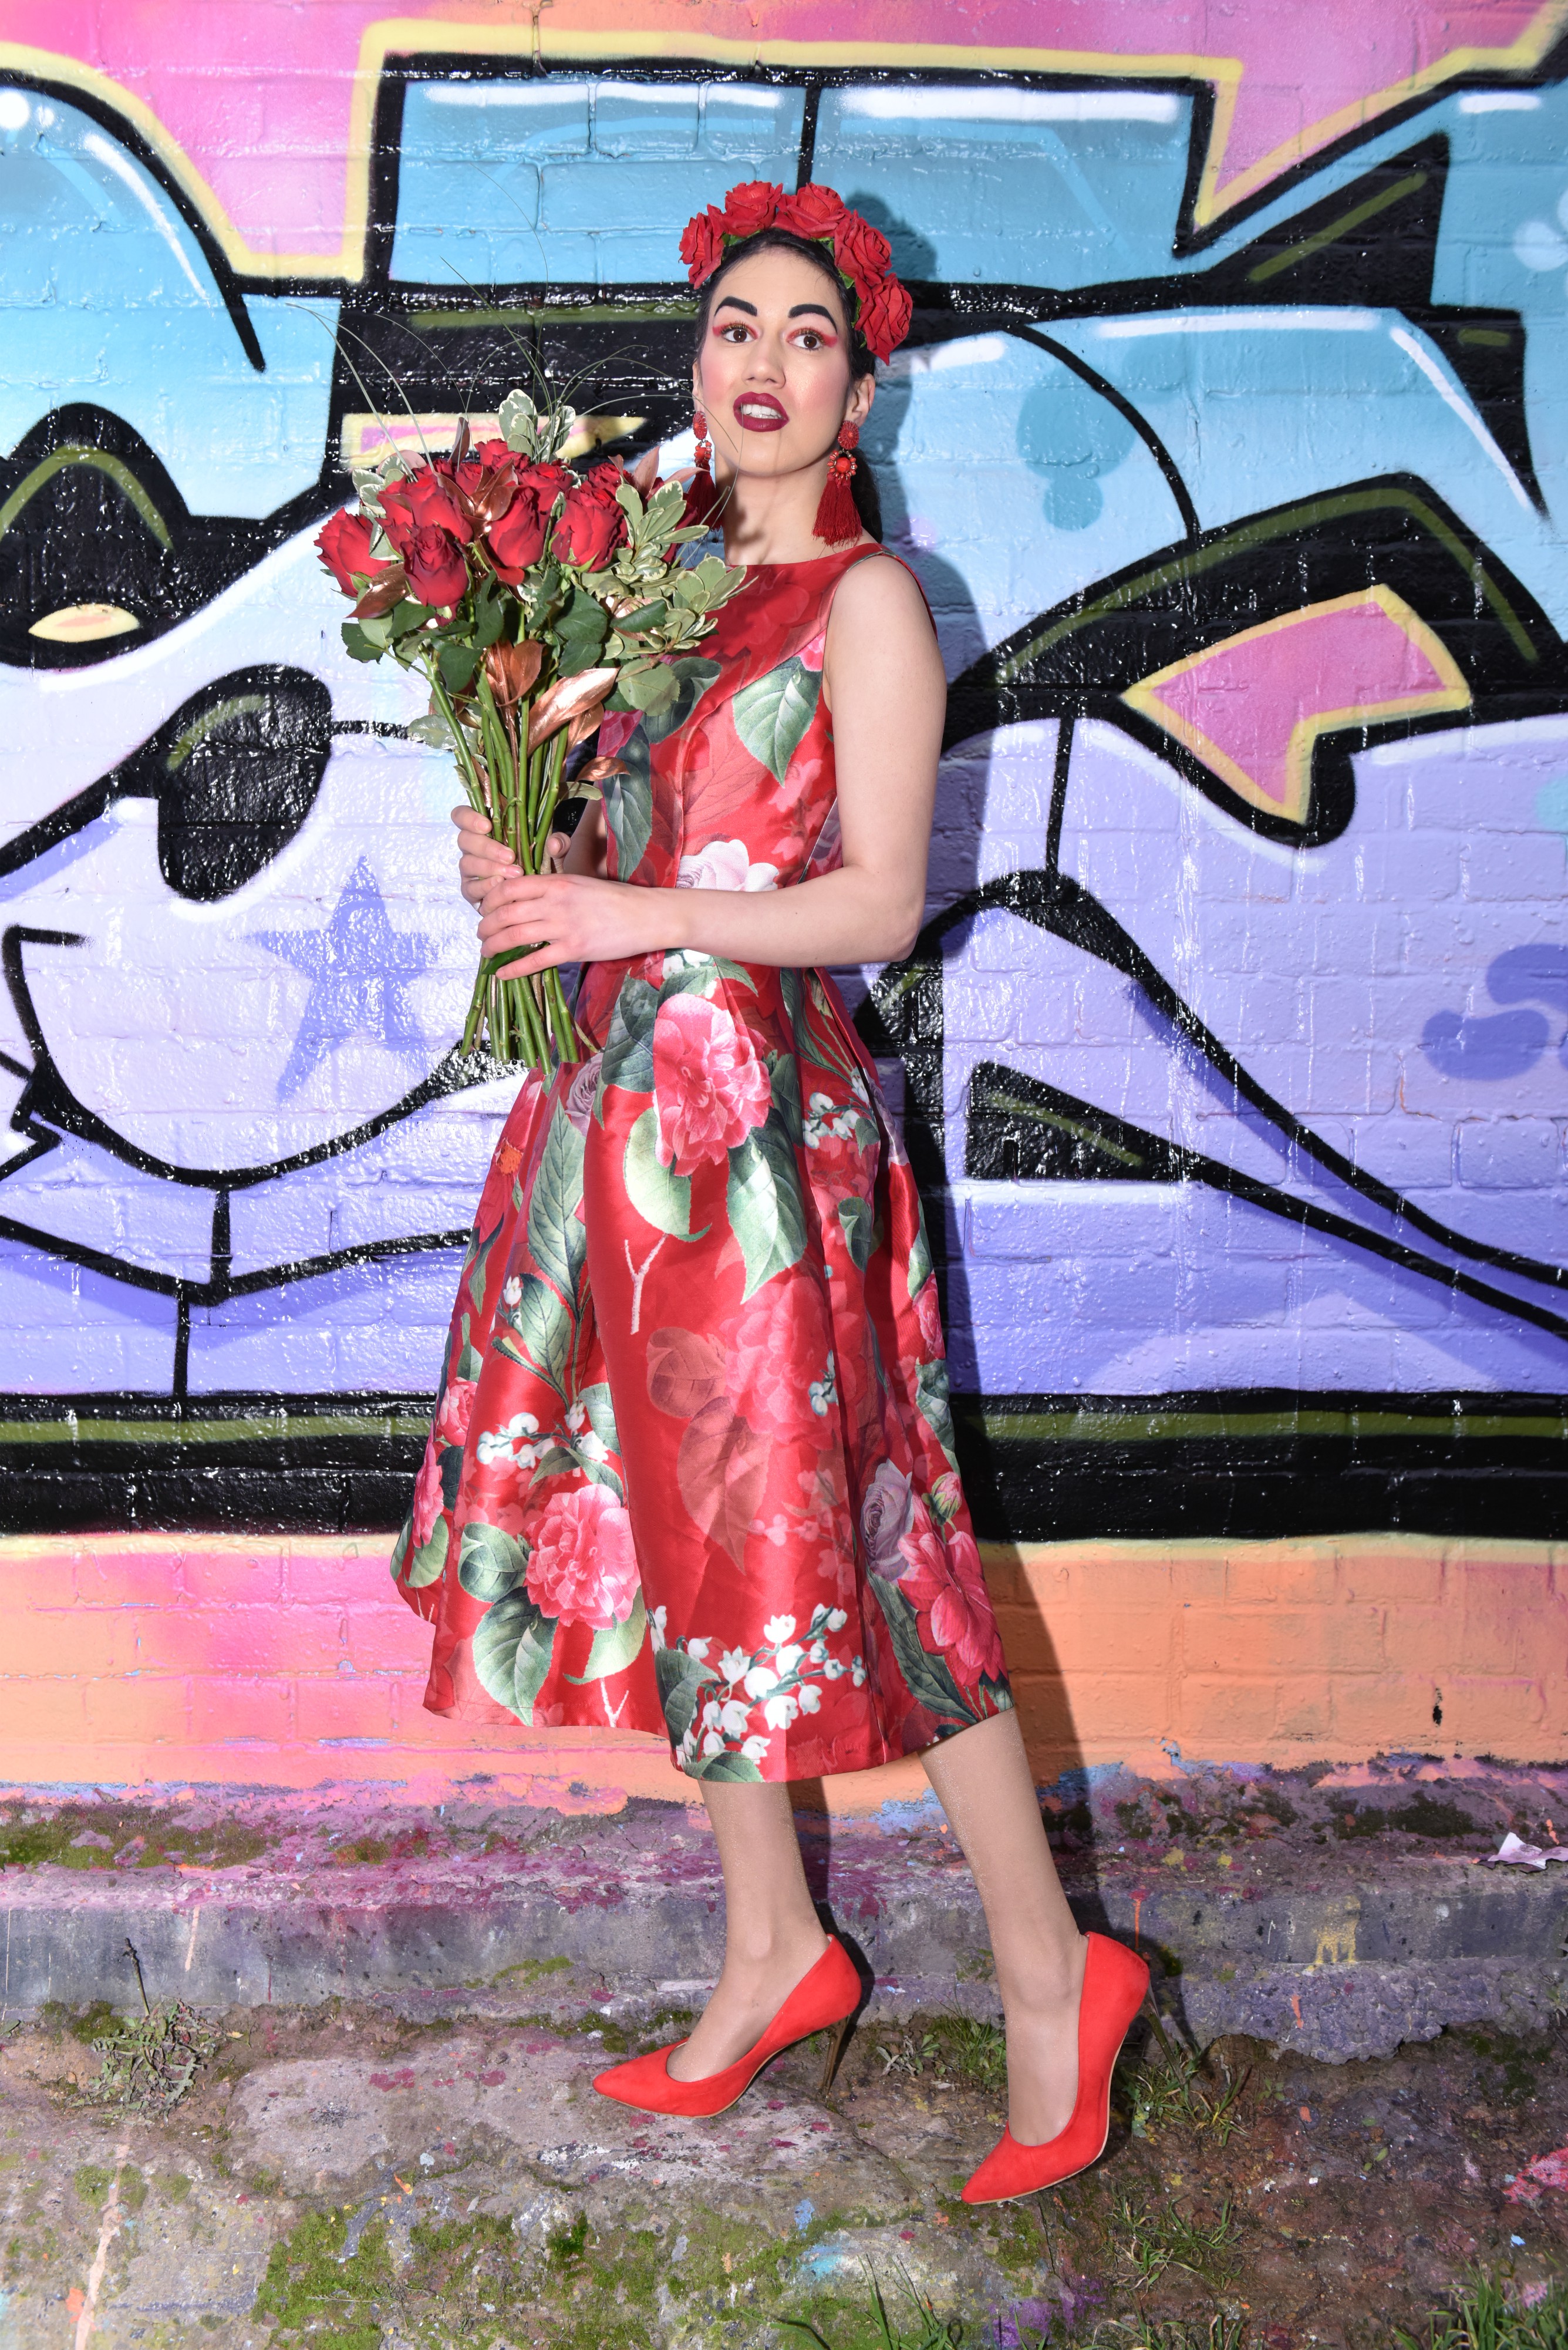 <img src="ana.jpg" alt="ana red floral dress dating dos and dont's"/> 